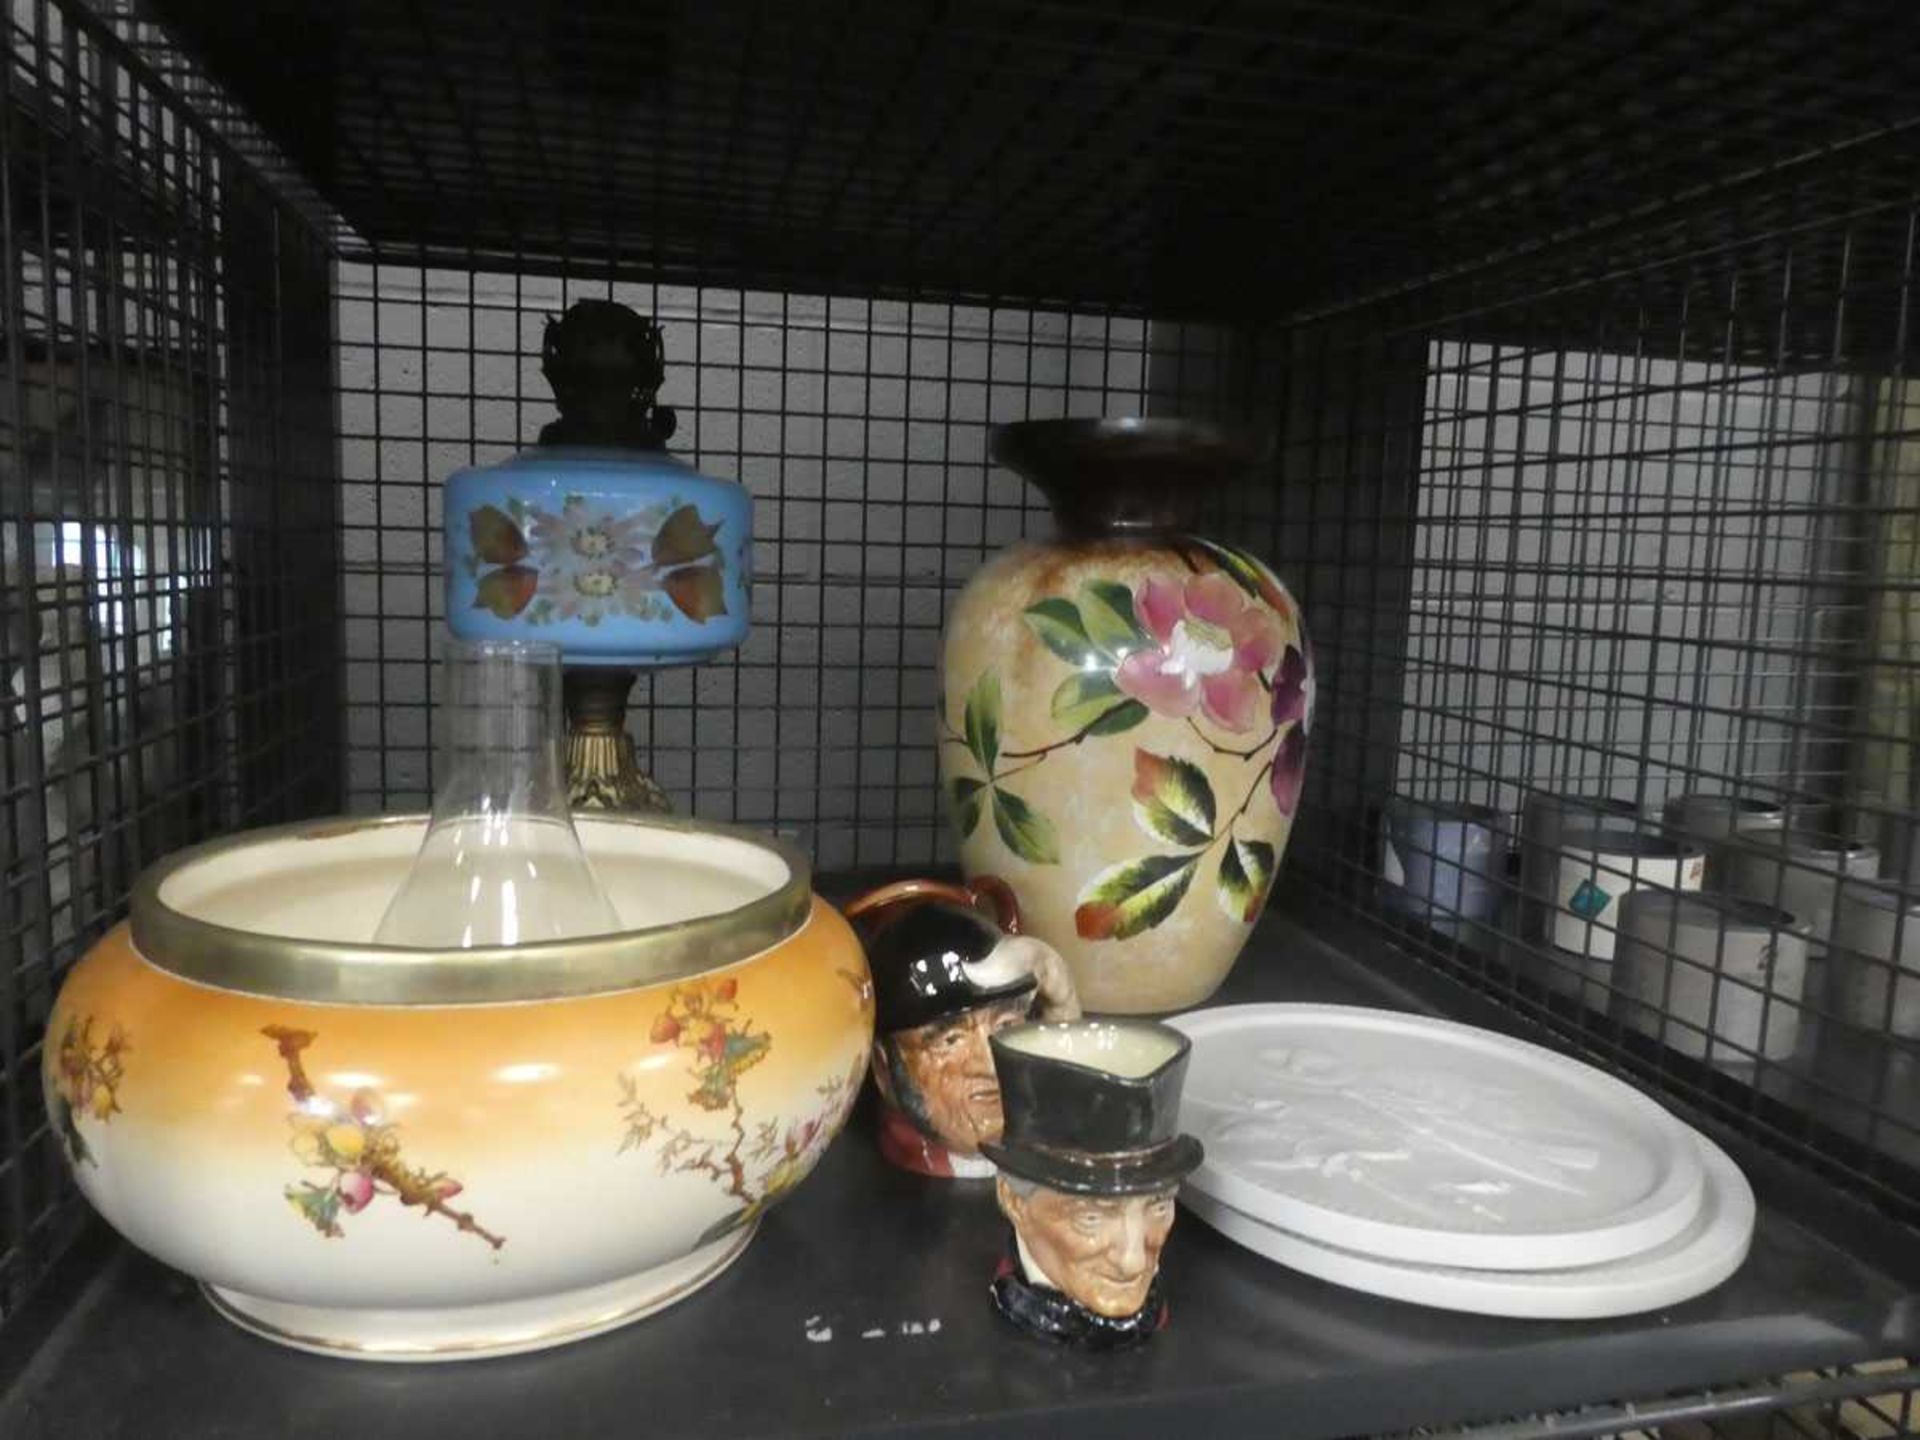 Cage containing fruit bowl, bird patterned plaques, miniature Toby jugs, brass oil lamps, and floral